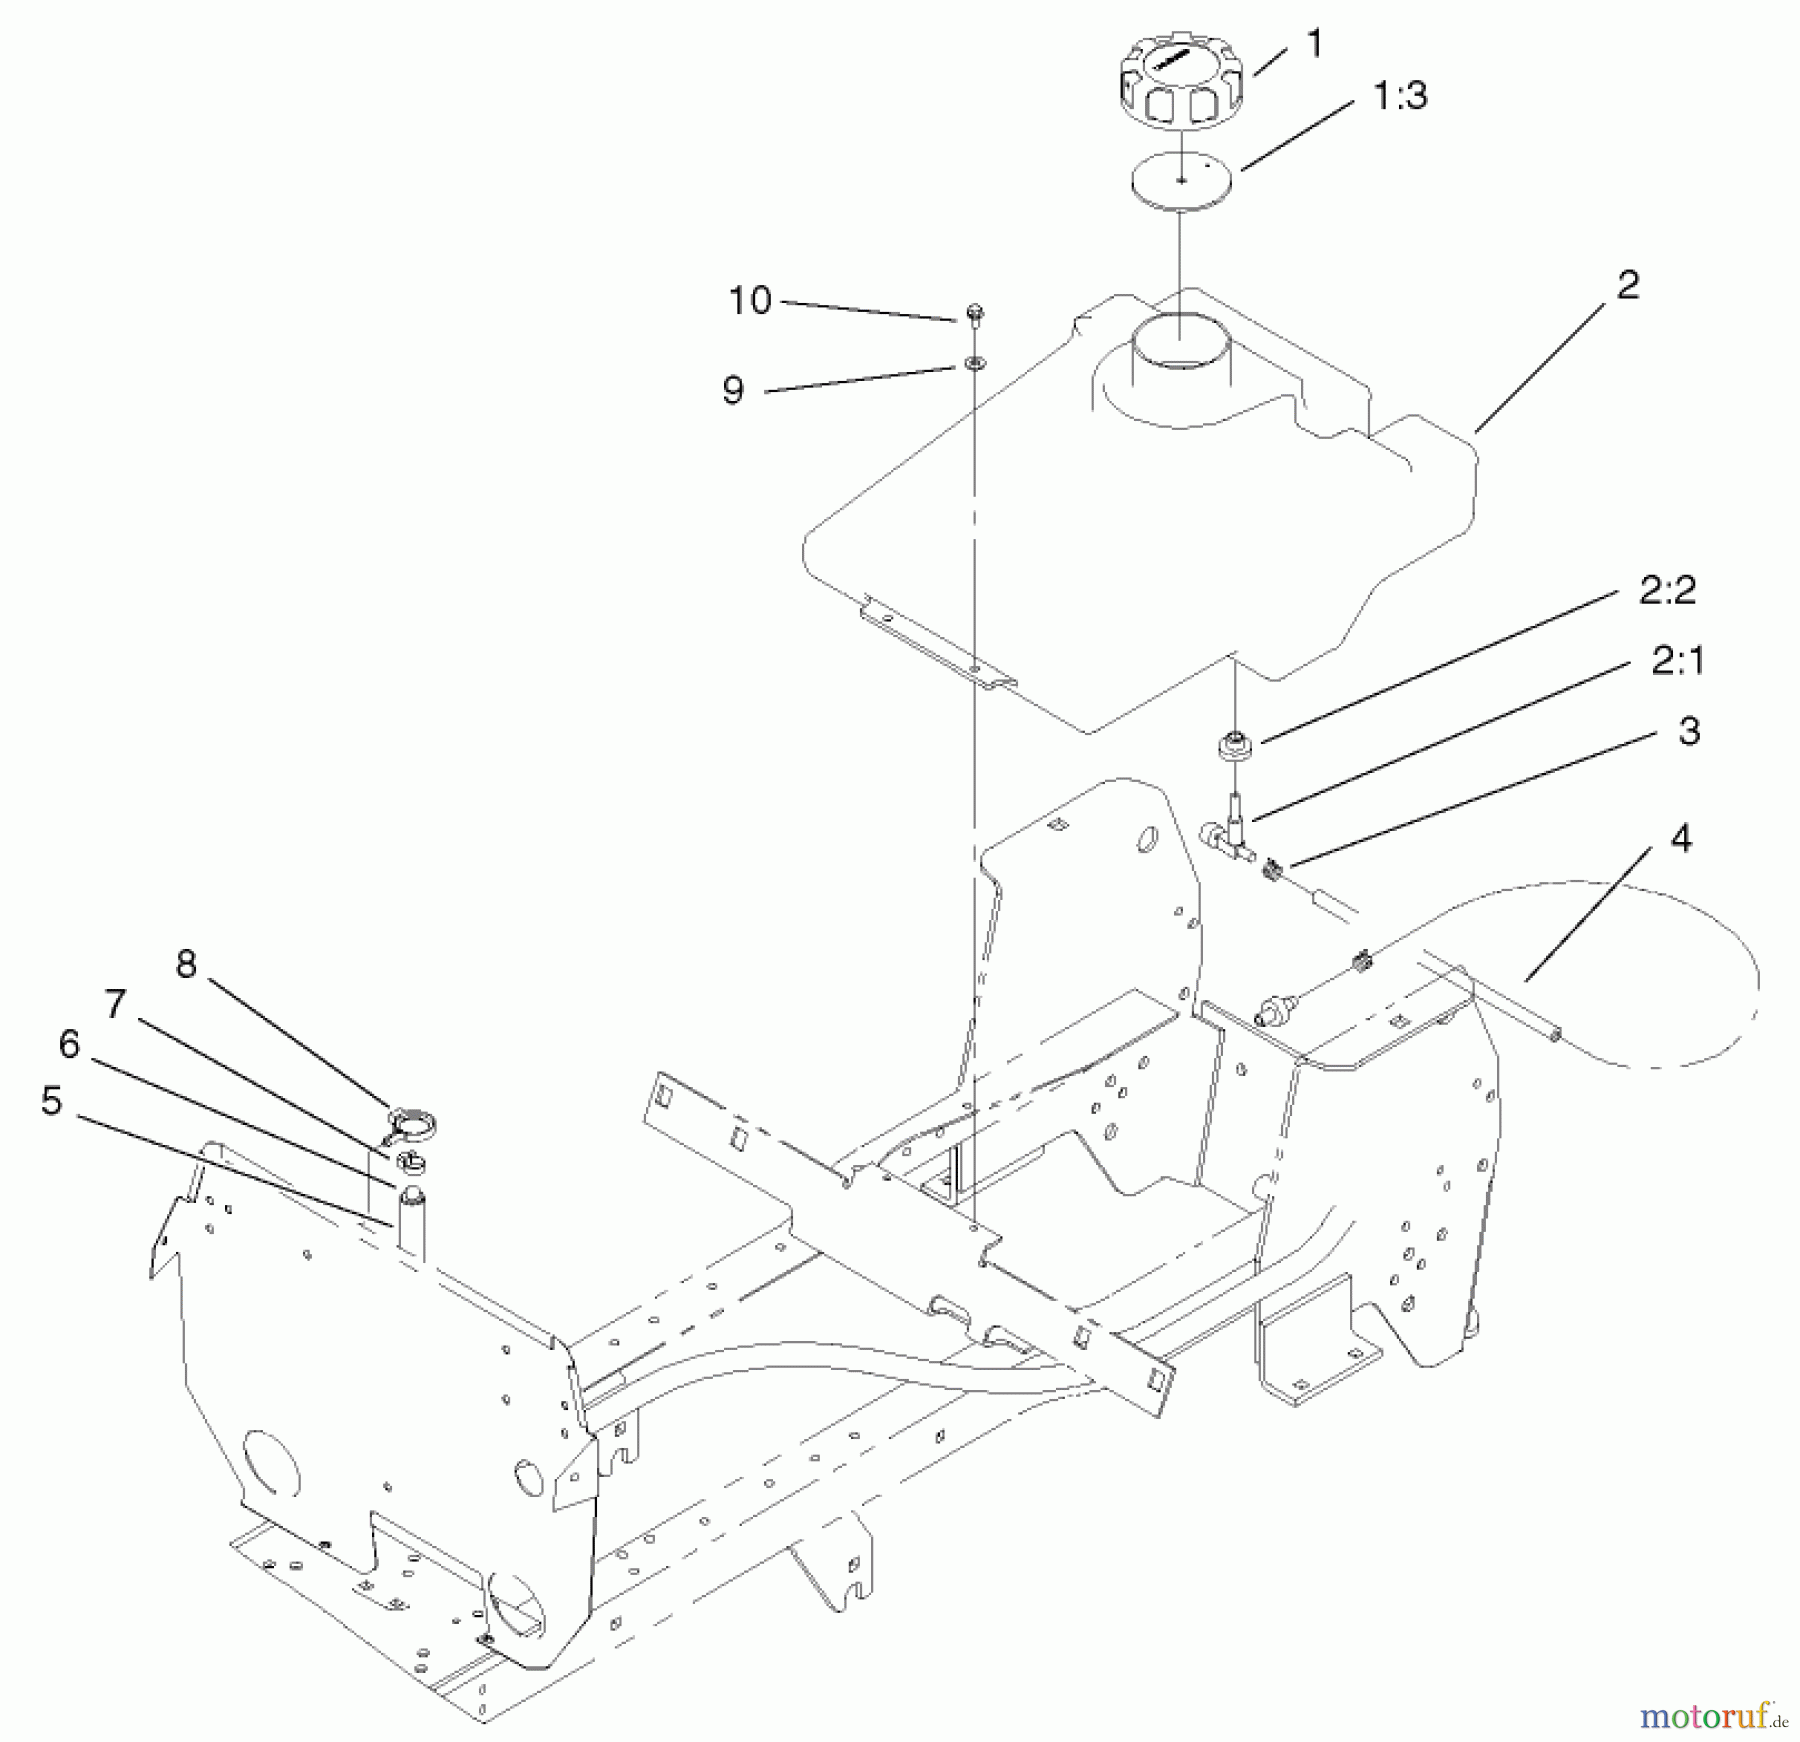  Toro Neu Mowers, Lawn & Garden Tractor Seite 1 72052 (266-H) - Toro 266-H Lawn and Garden Tractor, 2001 (210000001-210999999) FUEL TANK ASSEMBLY